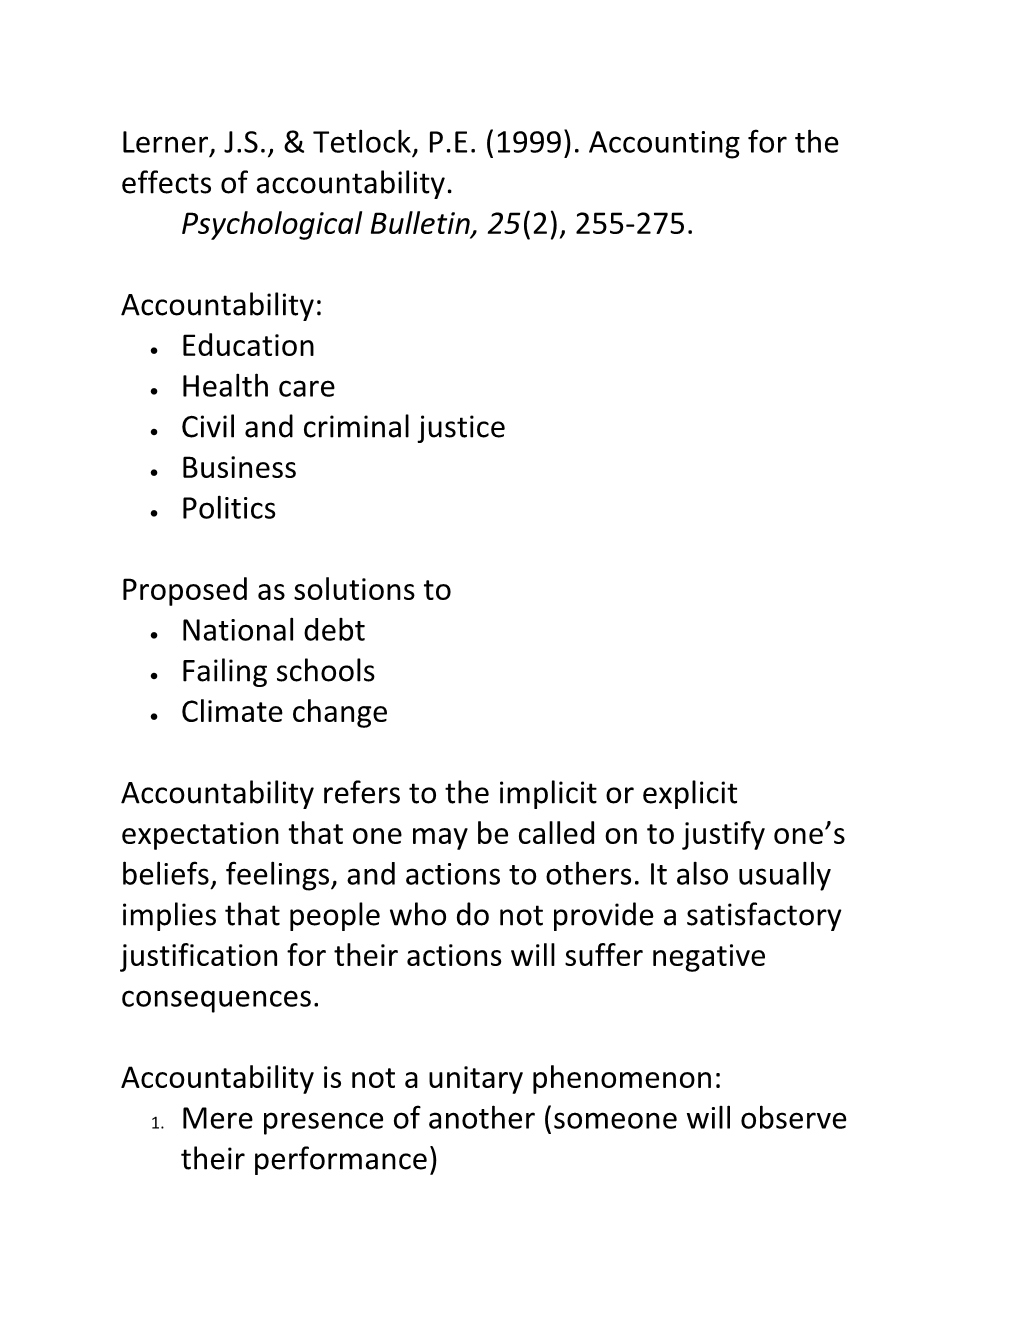 Lerner, J.S., & Tetlock, P.E. (1999).Accounting for the Effects of Accountability